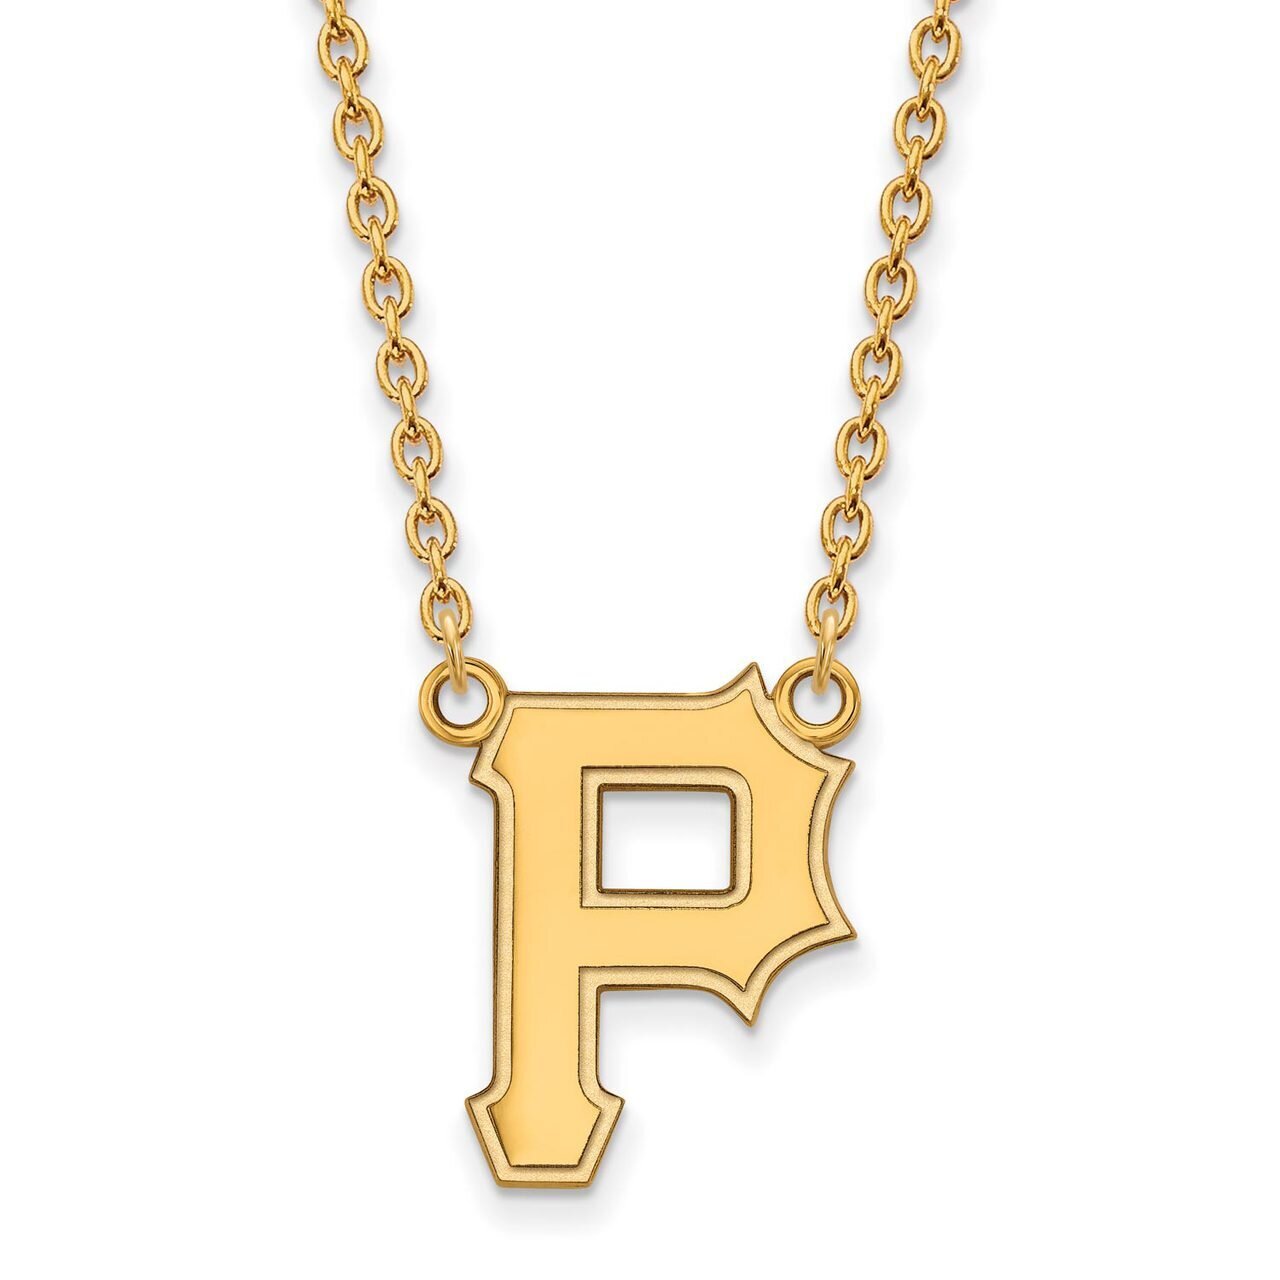 Pittsburgh Pirates Large Pendant with Chain Necklace 10k Yellow Gold 1Y007PIR-18